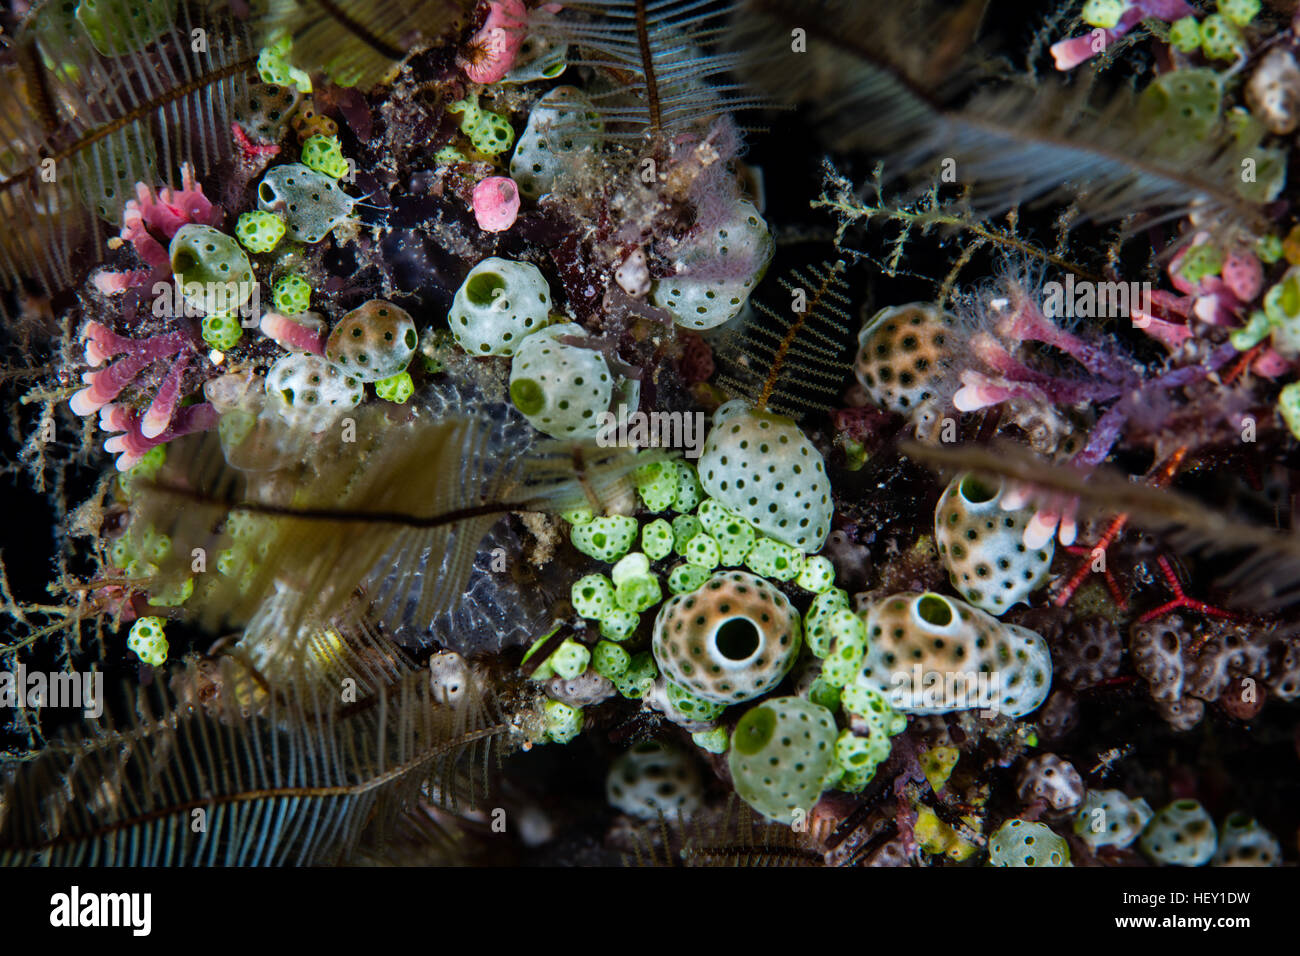 Colorful tunicates, hydroids, and other invertebrates grow on a coral reef in the Solomon Islands. Stock Photo